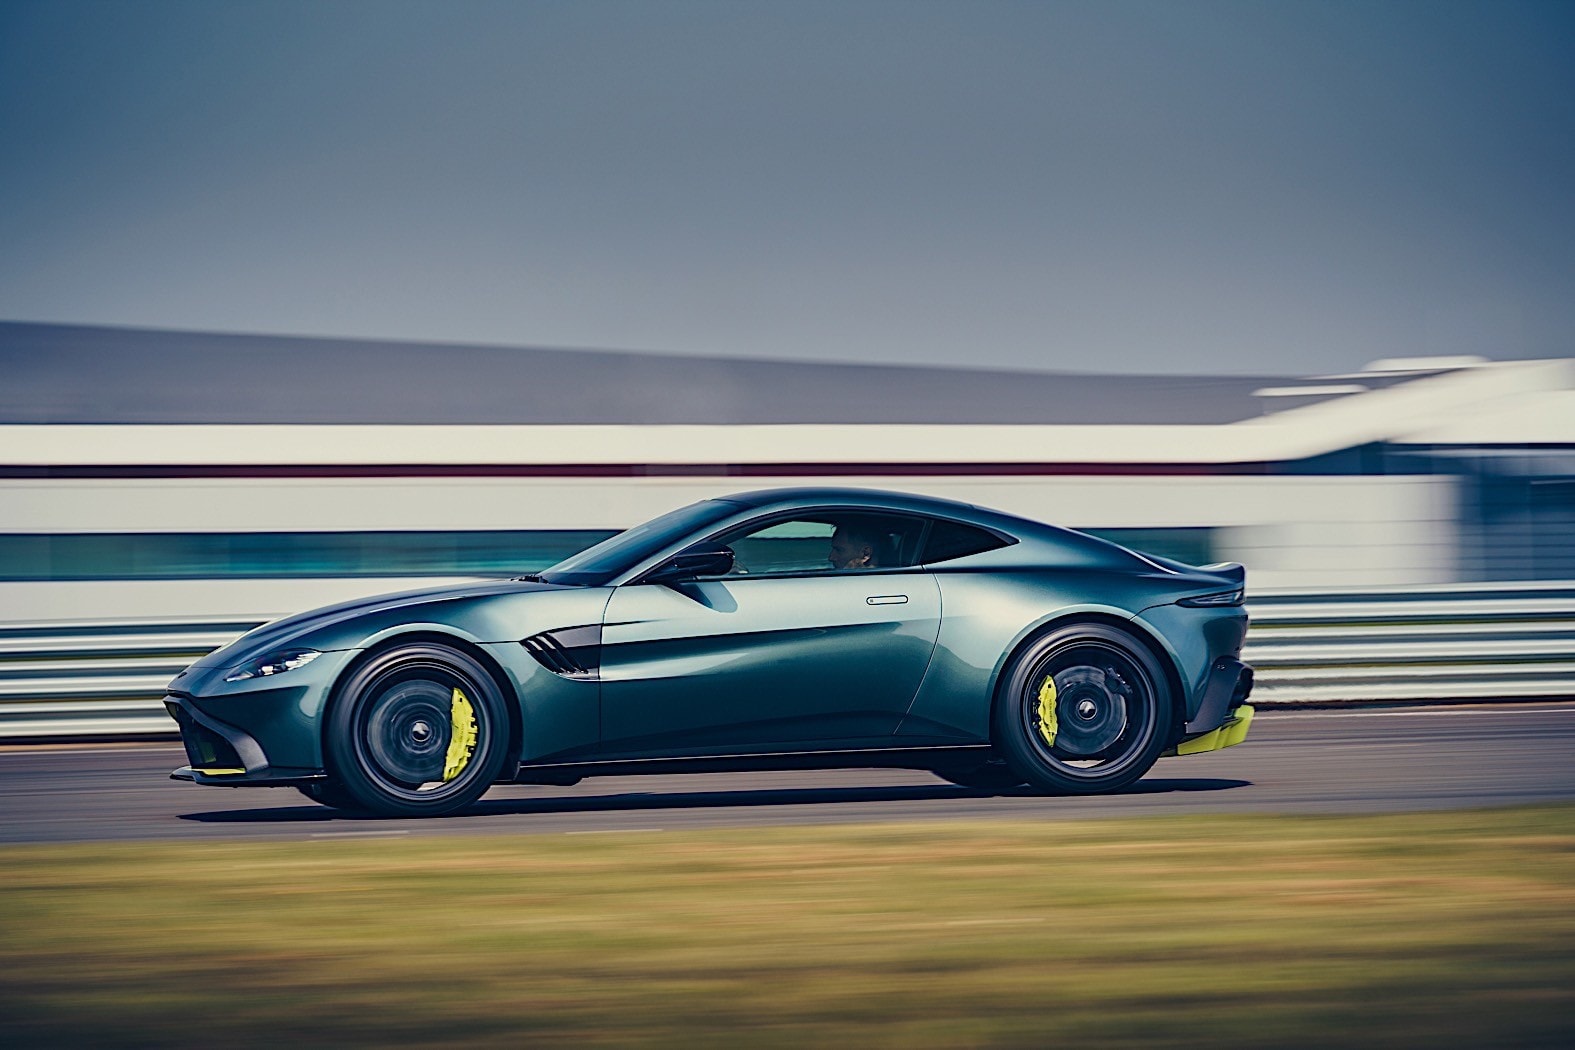 Aston Martin EV to Debut in 2025, DB11 and Vantage Will Go Electric as